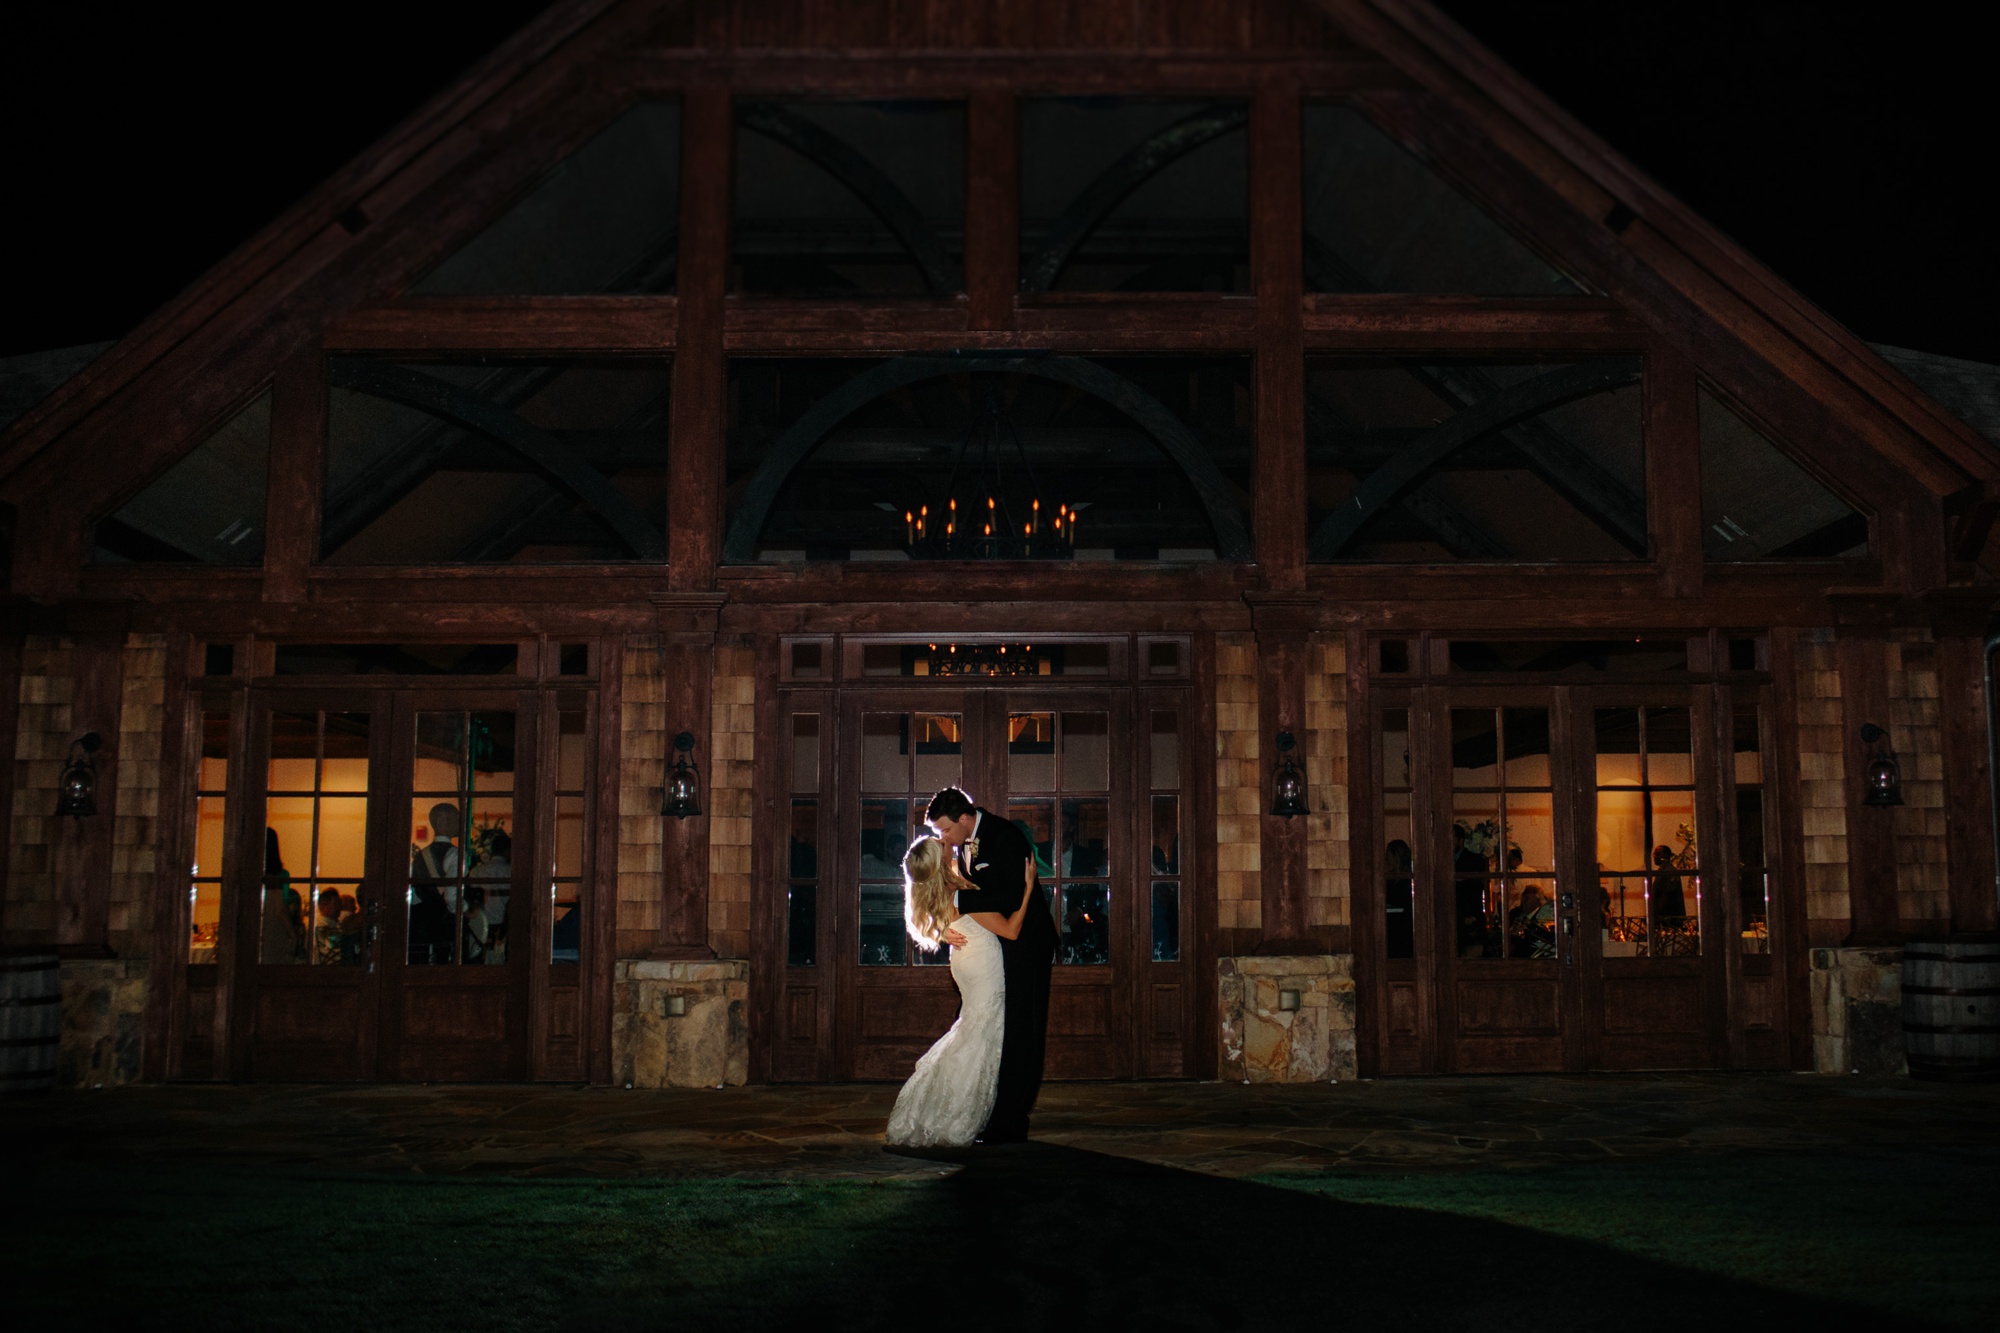 A night shot in front of your wedding venue is one photo not to miss! Get yours with luxury destination wedding photographer Rebecca Cerasani.